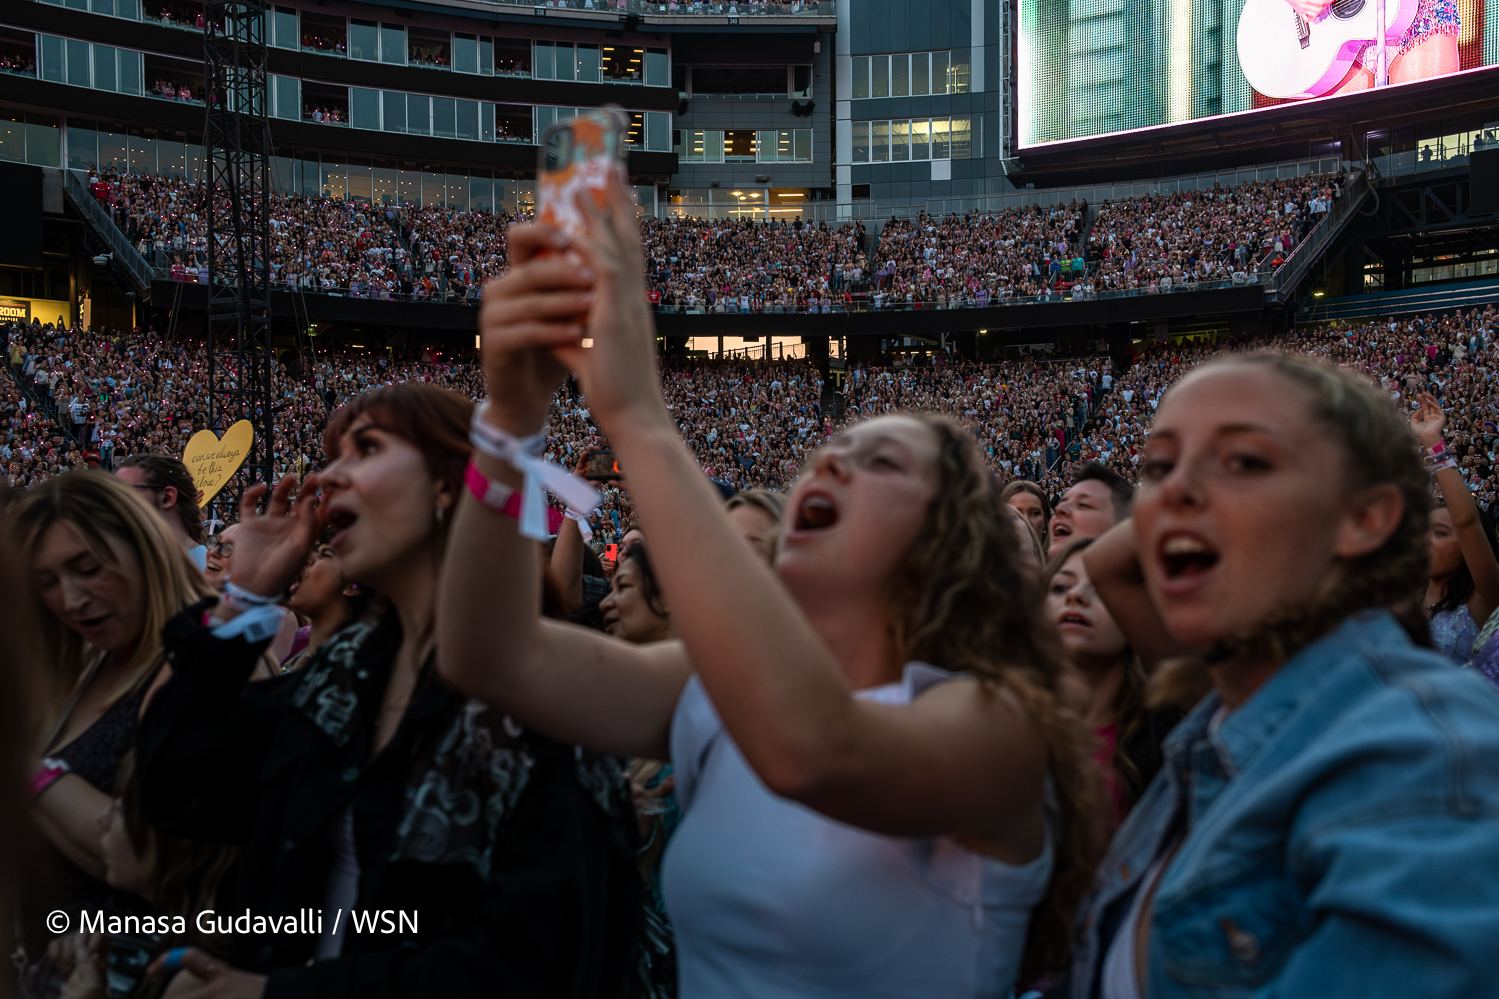 The crowd sings along to Taylor Swift’s performance. A woman in white raises her phone to film the performance.